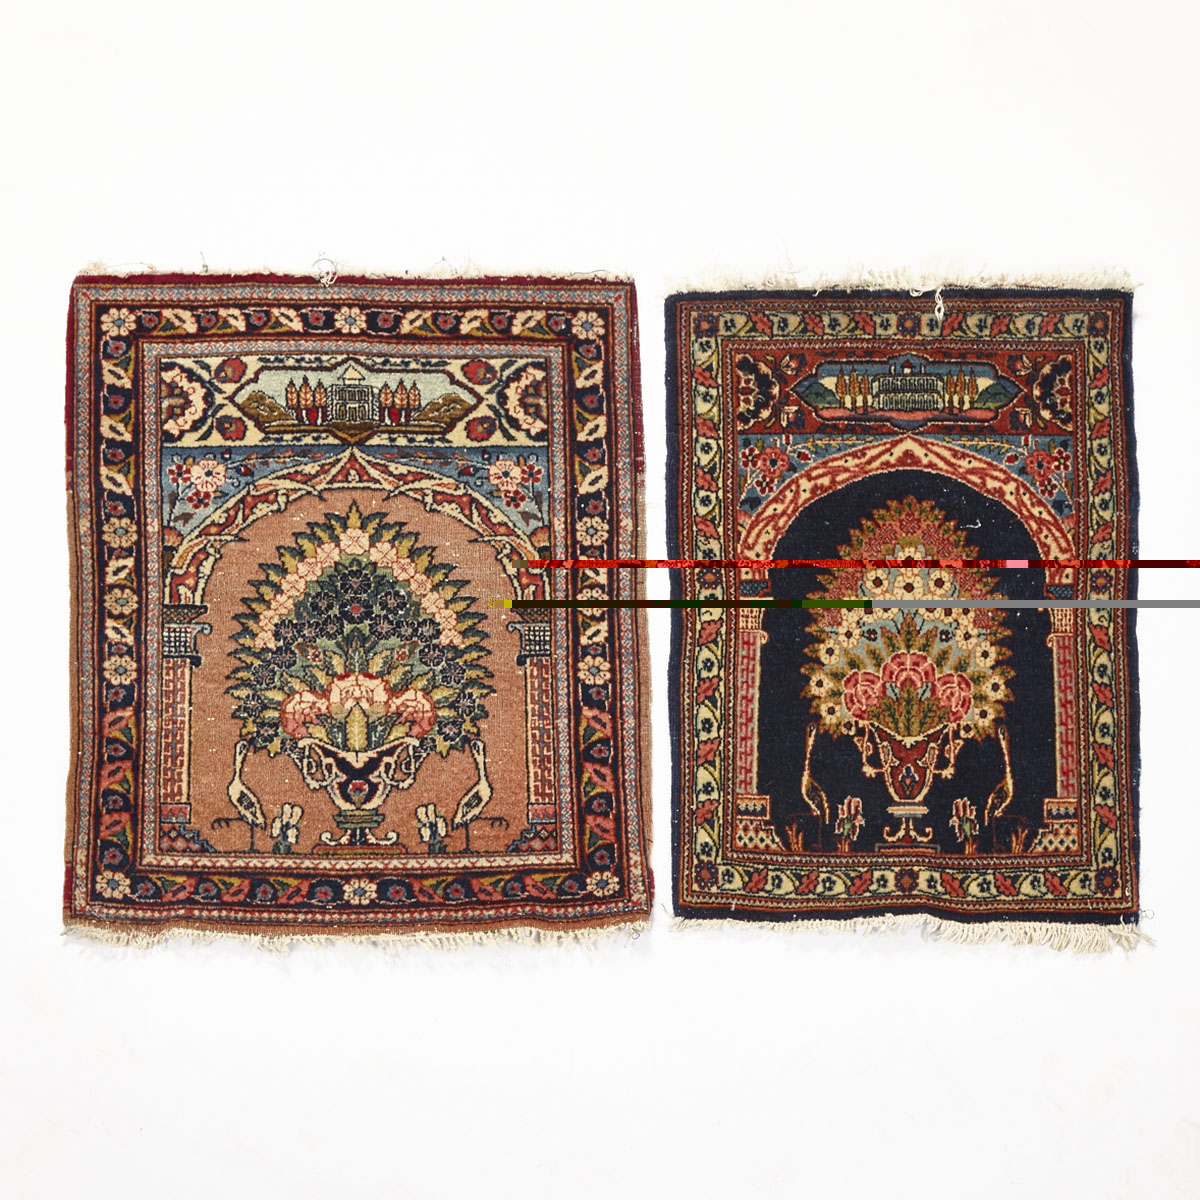 Two Central Persian Prayer Mats, mid. 20th century